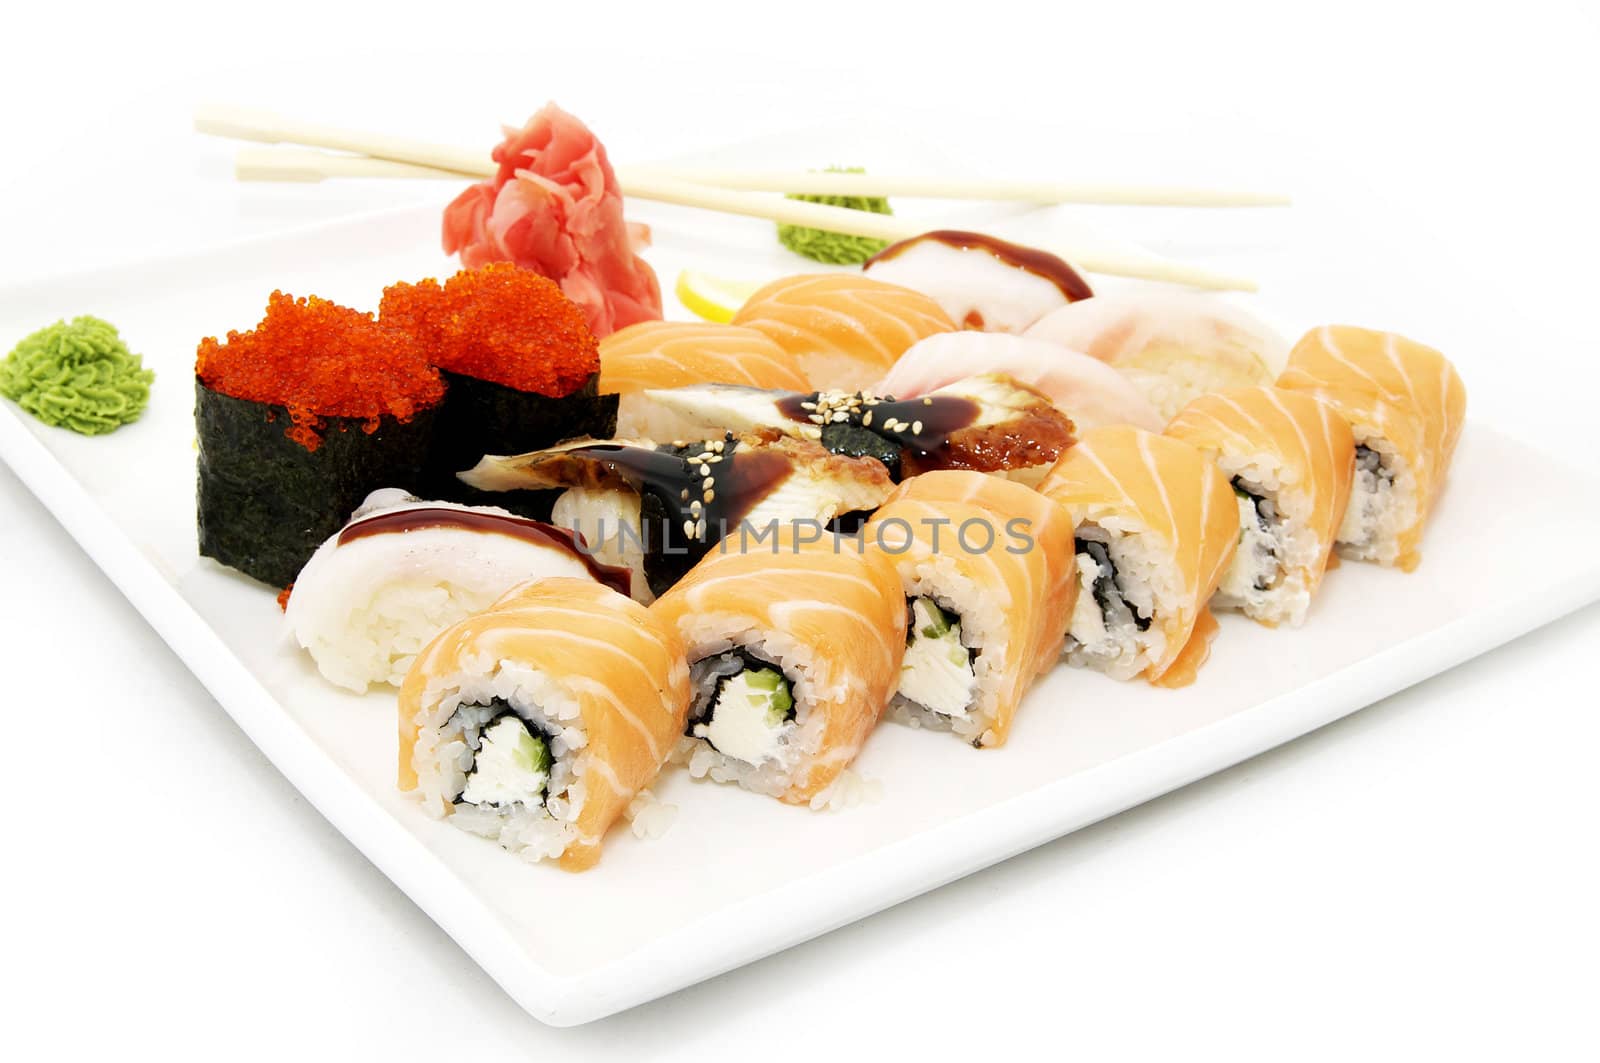 Plate of Japanese Sushi by Lester120